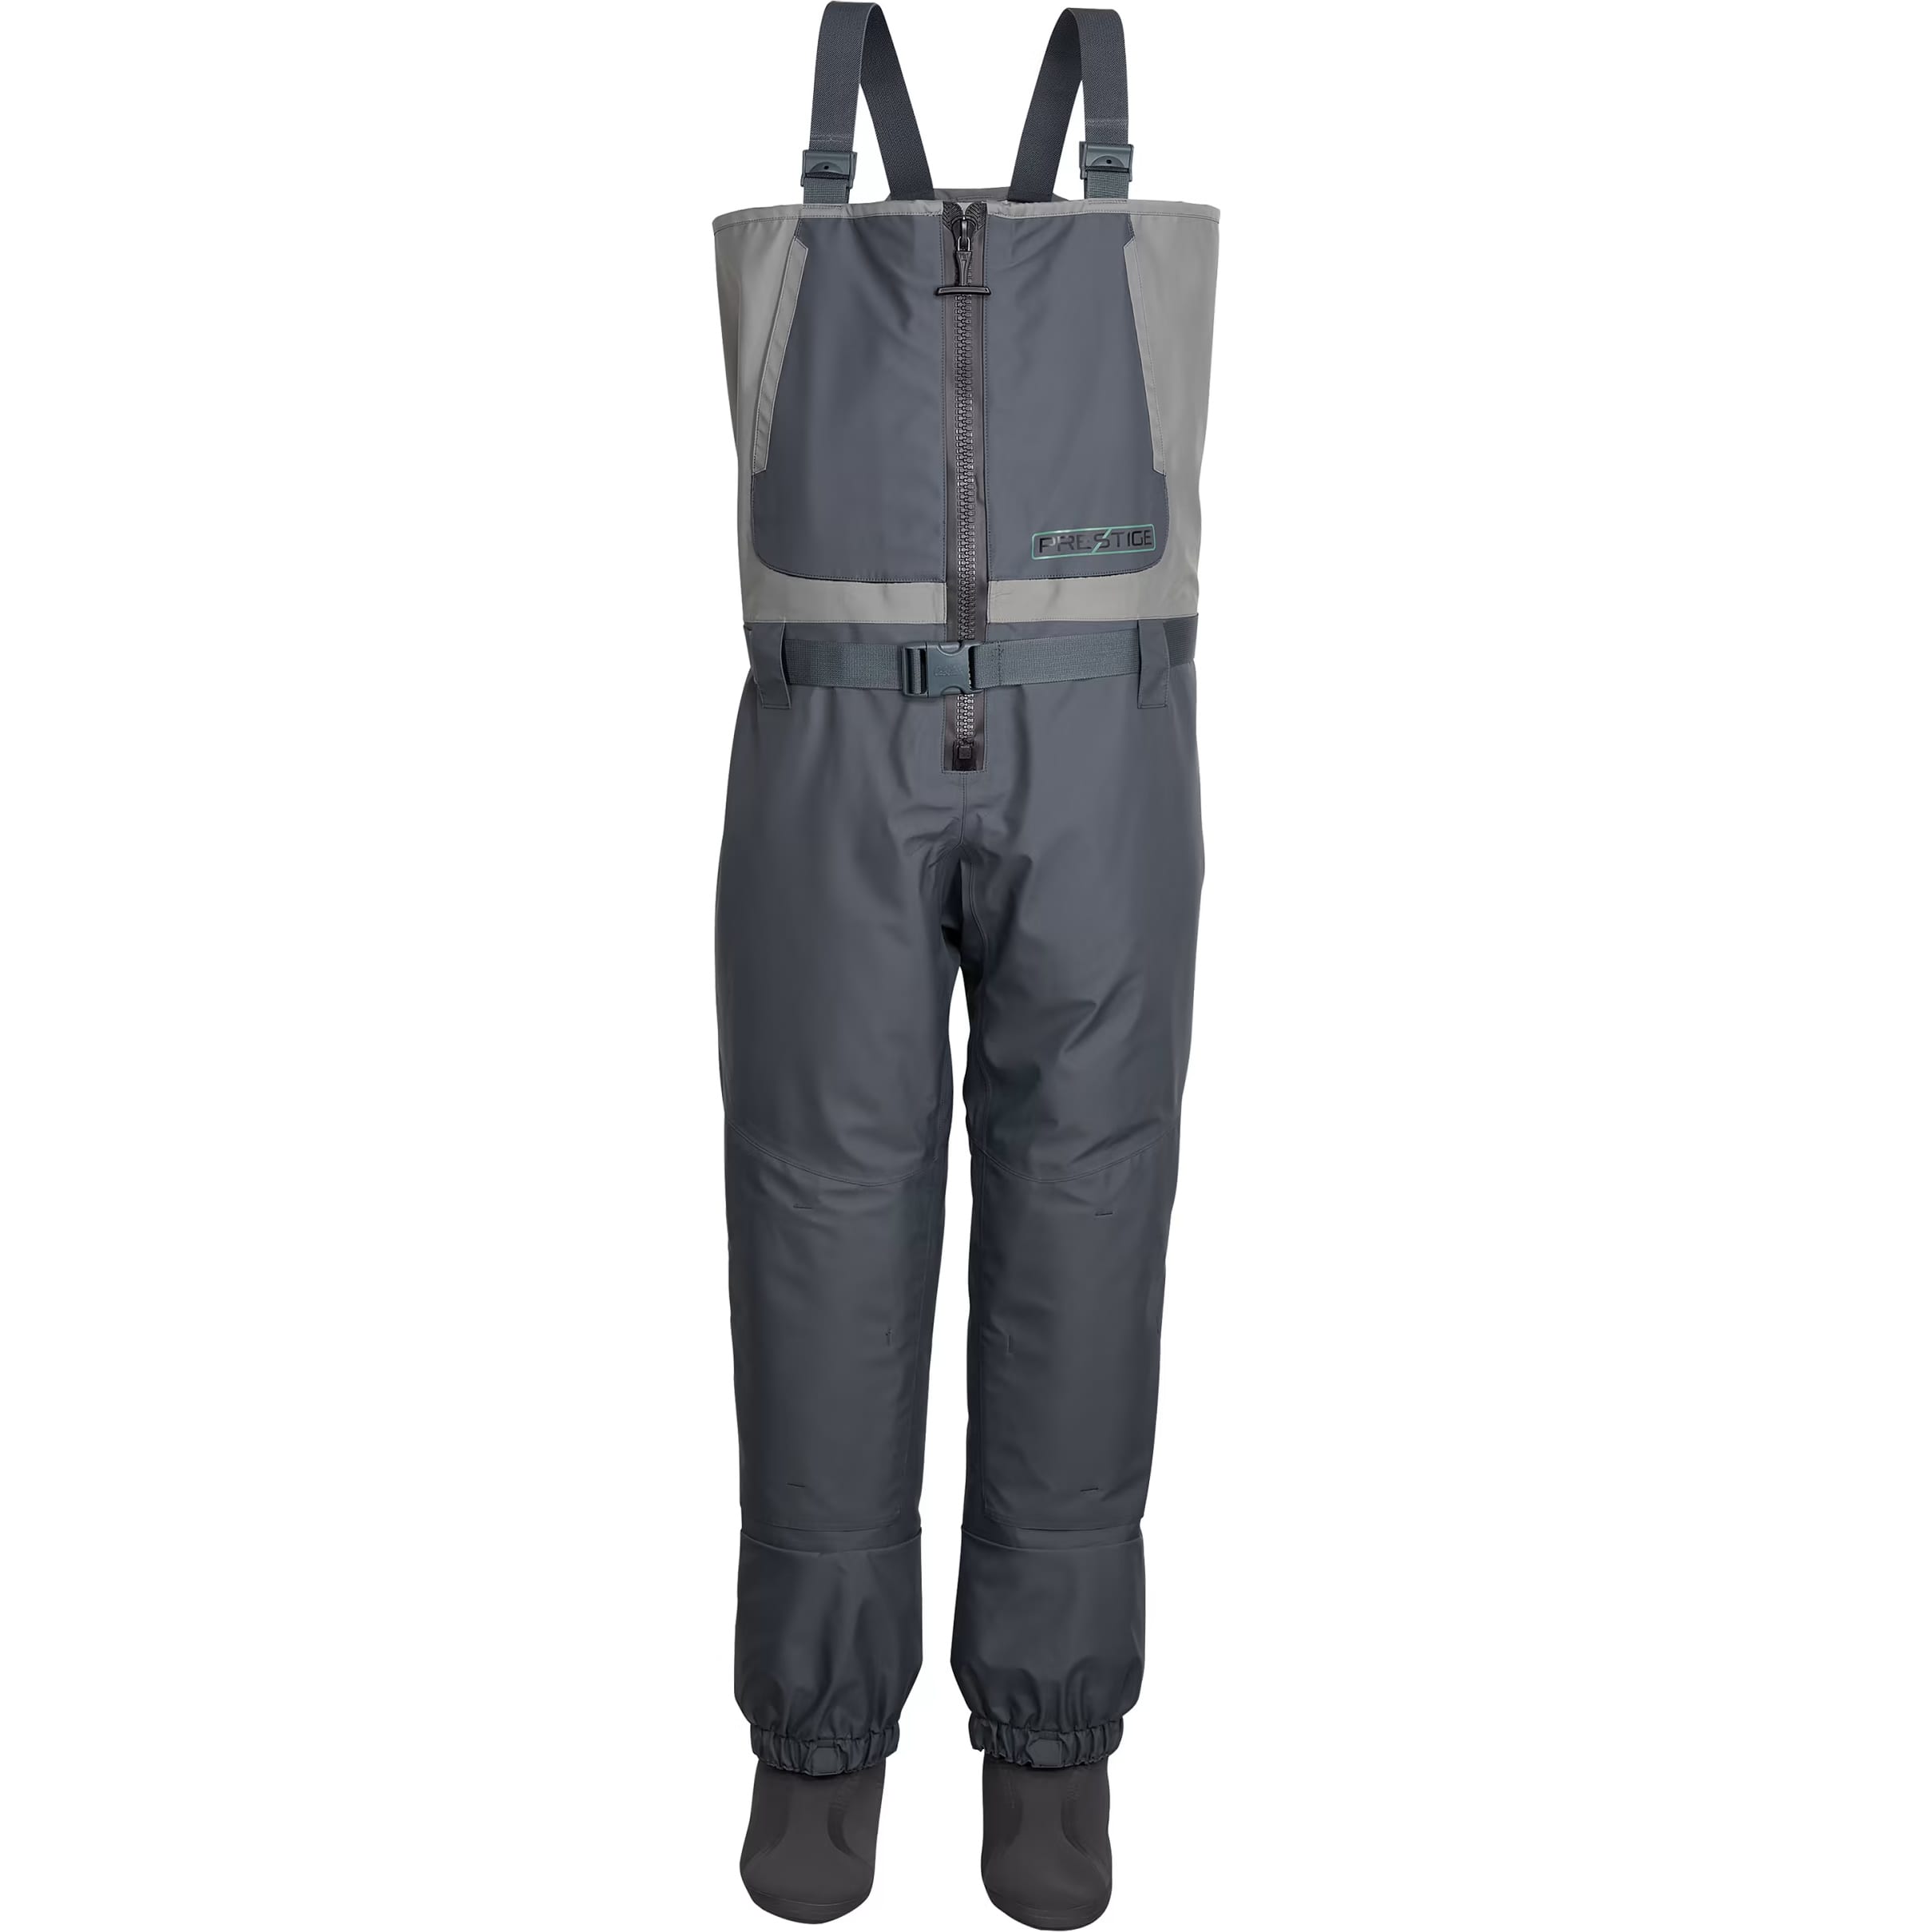 White River Fly Shop Classic II Neoprene Lug Sole Waders for Men